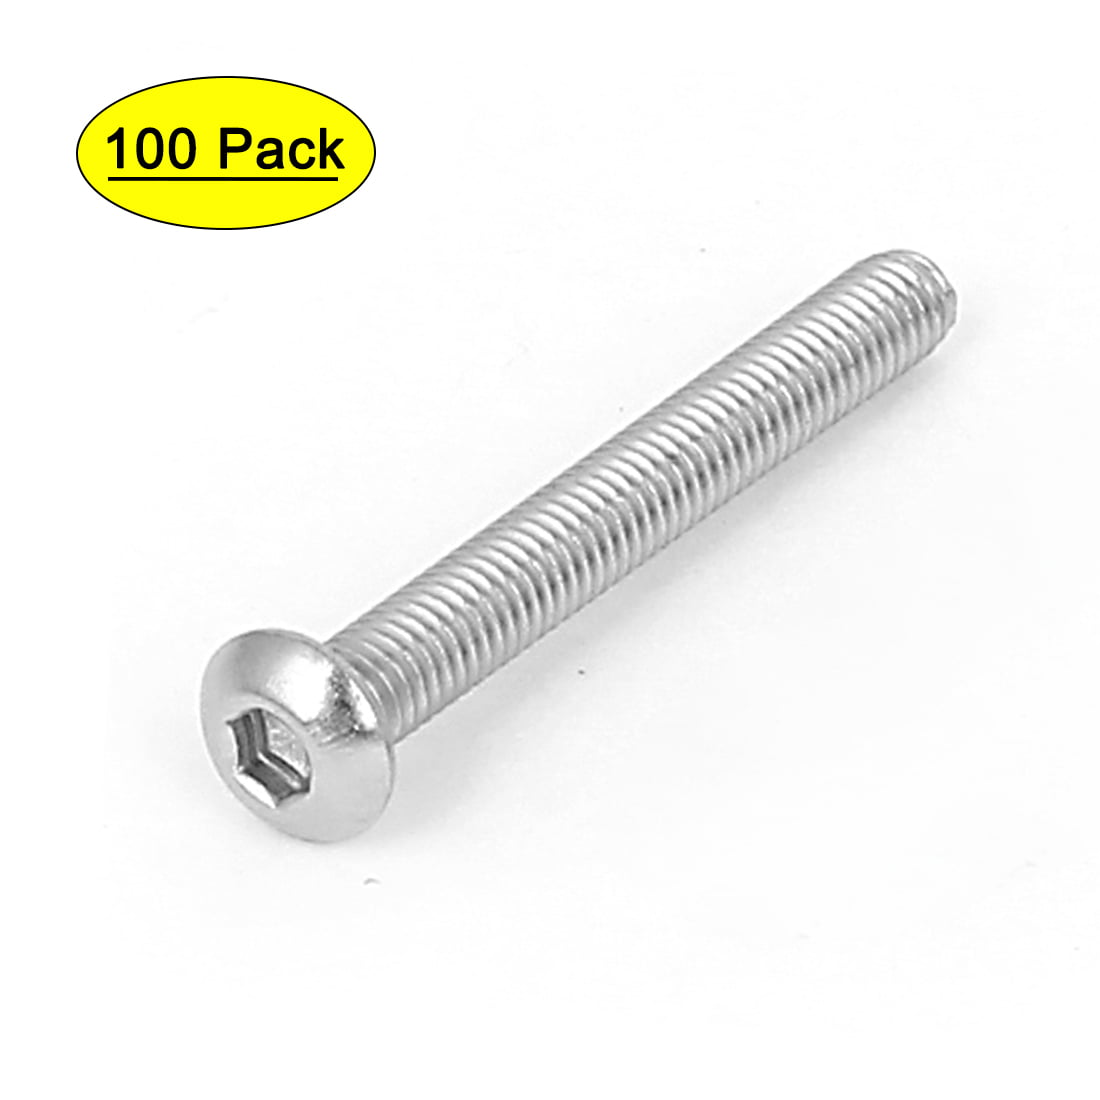 36 x Stainless Steel Screws for Furnitures Feets M3x25mm Assortments 